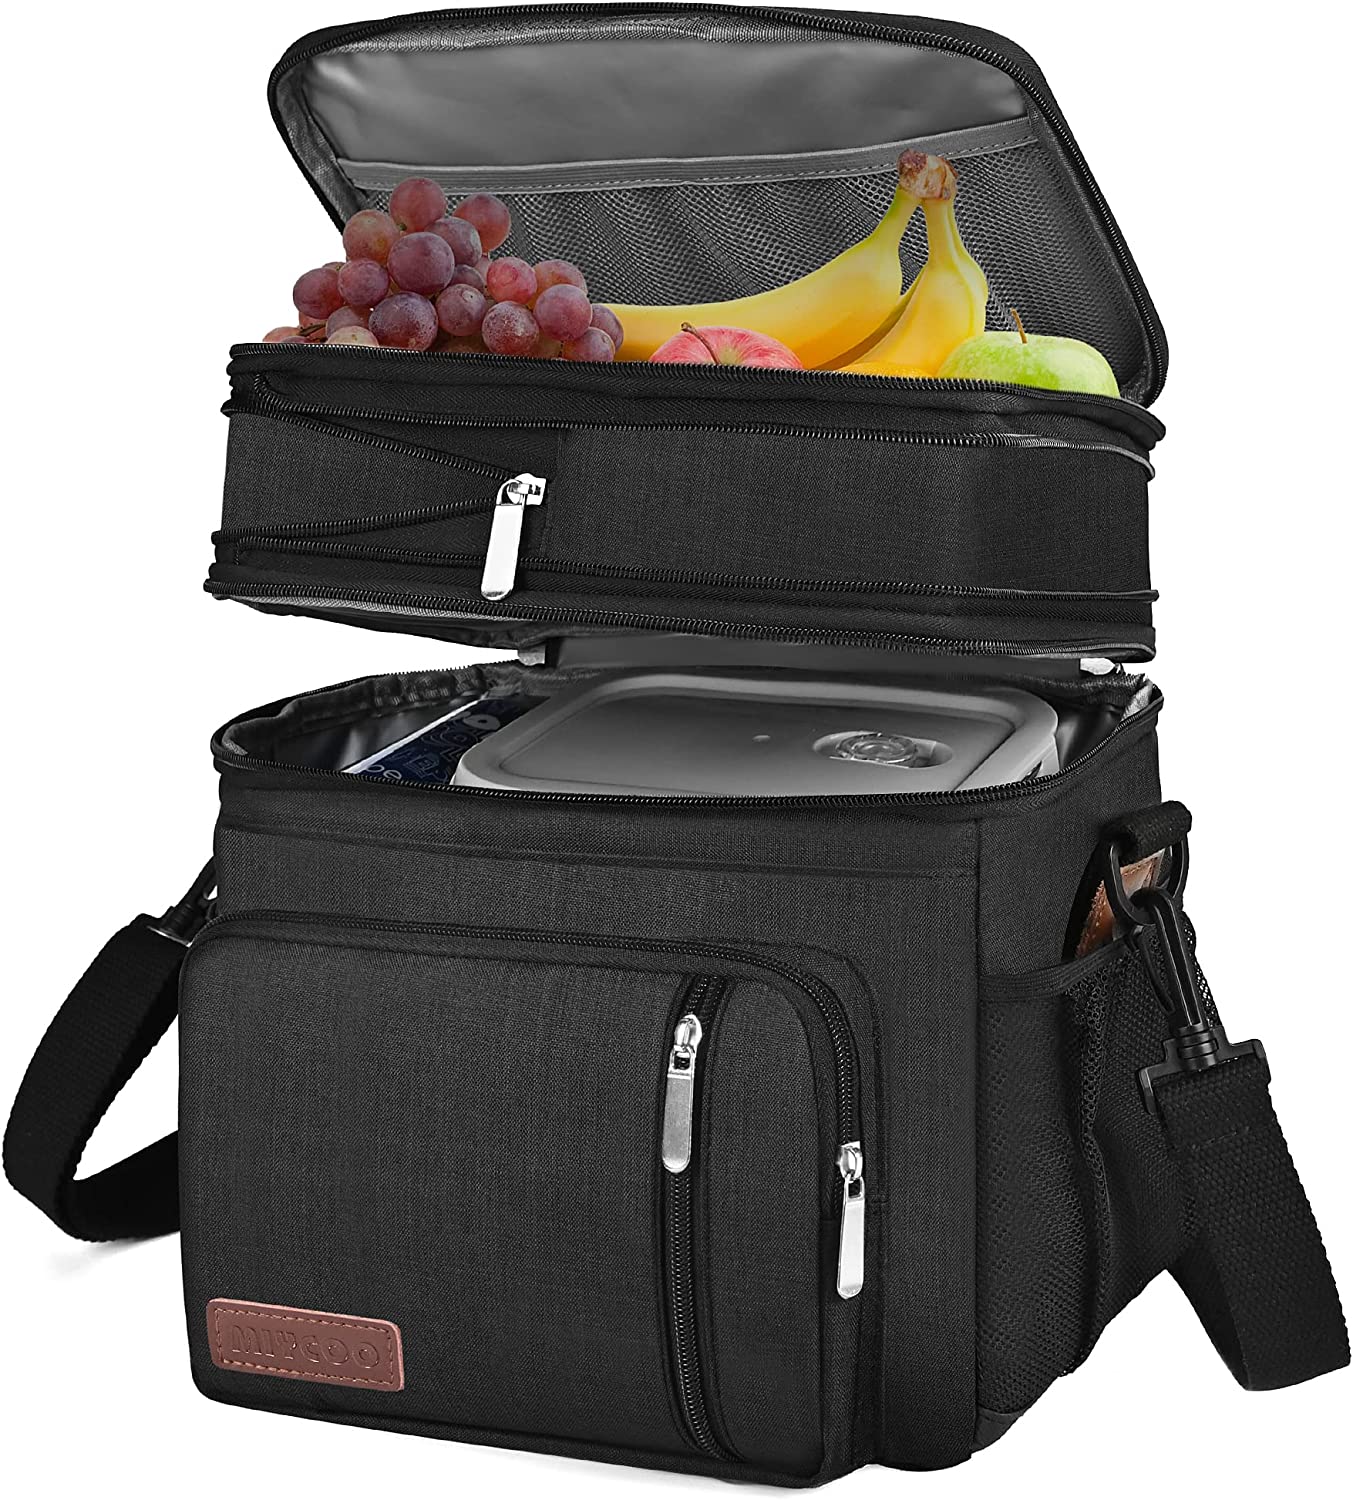  OCKLILY Lunch Box for Men, 17L Insulated Cooler Lunch